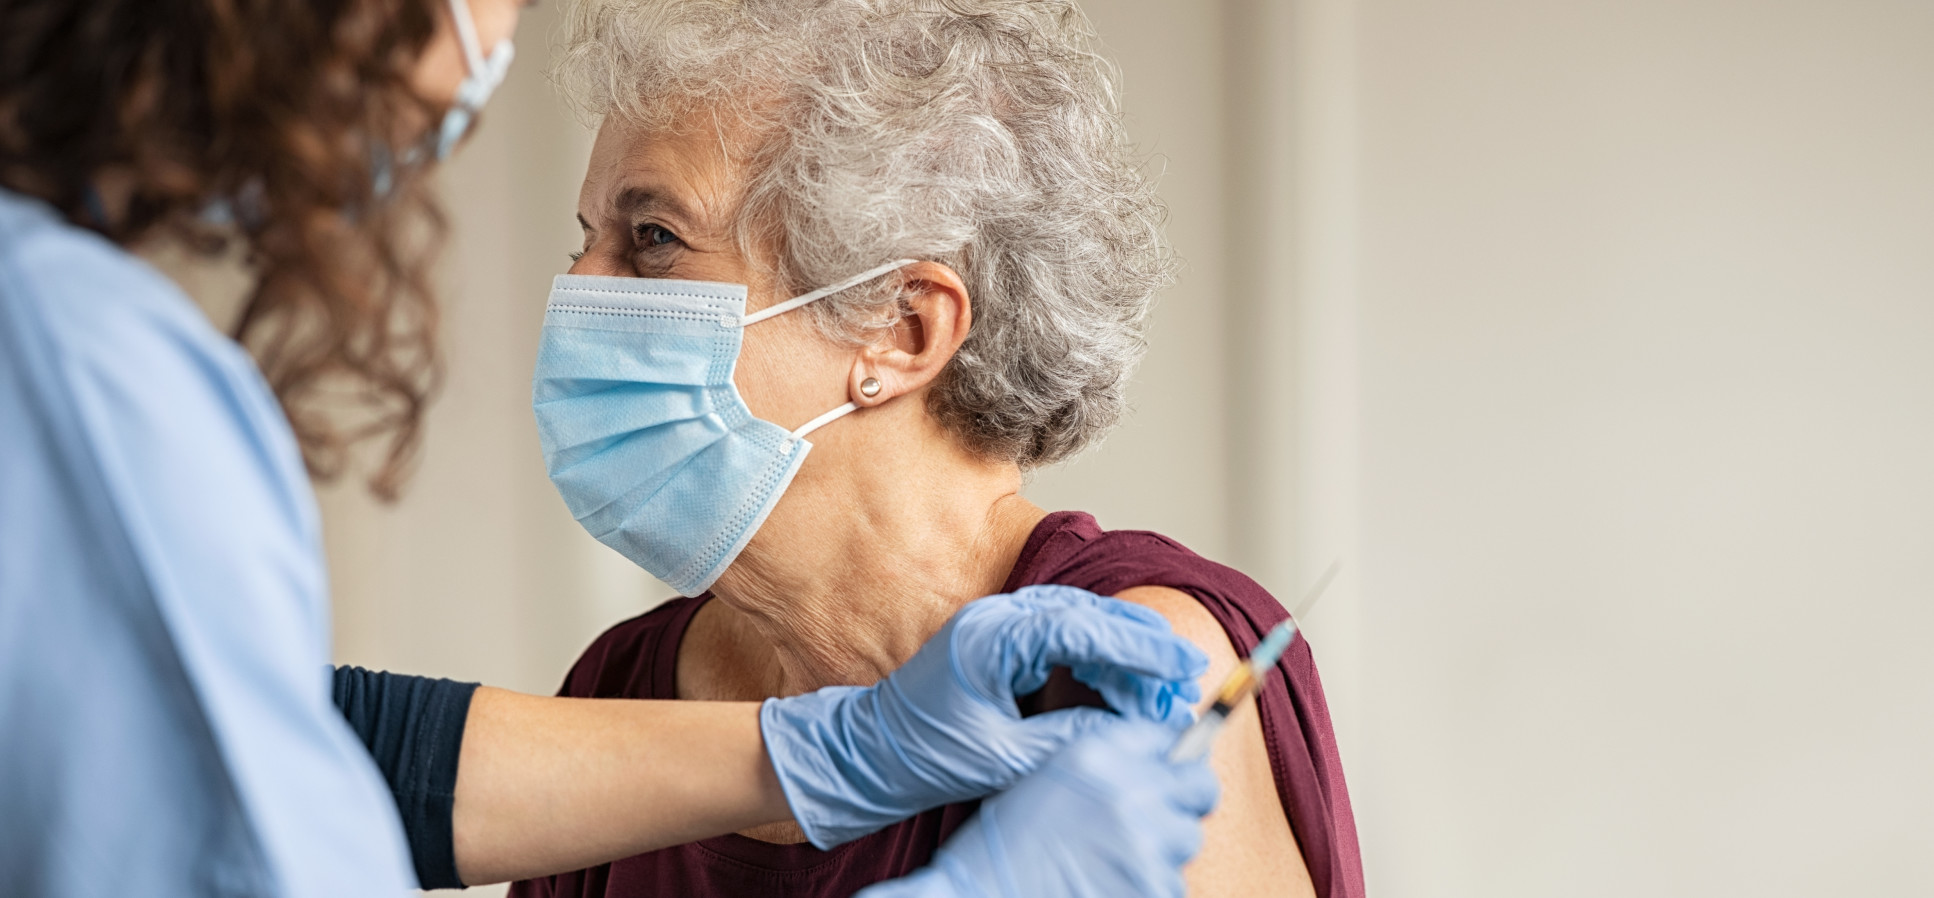 Image of a woman receiving a vaccine from a medical professional.